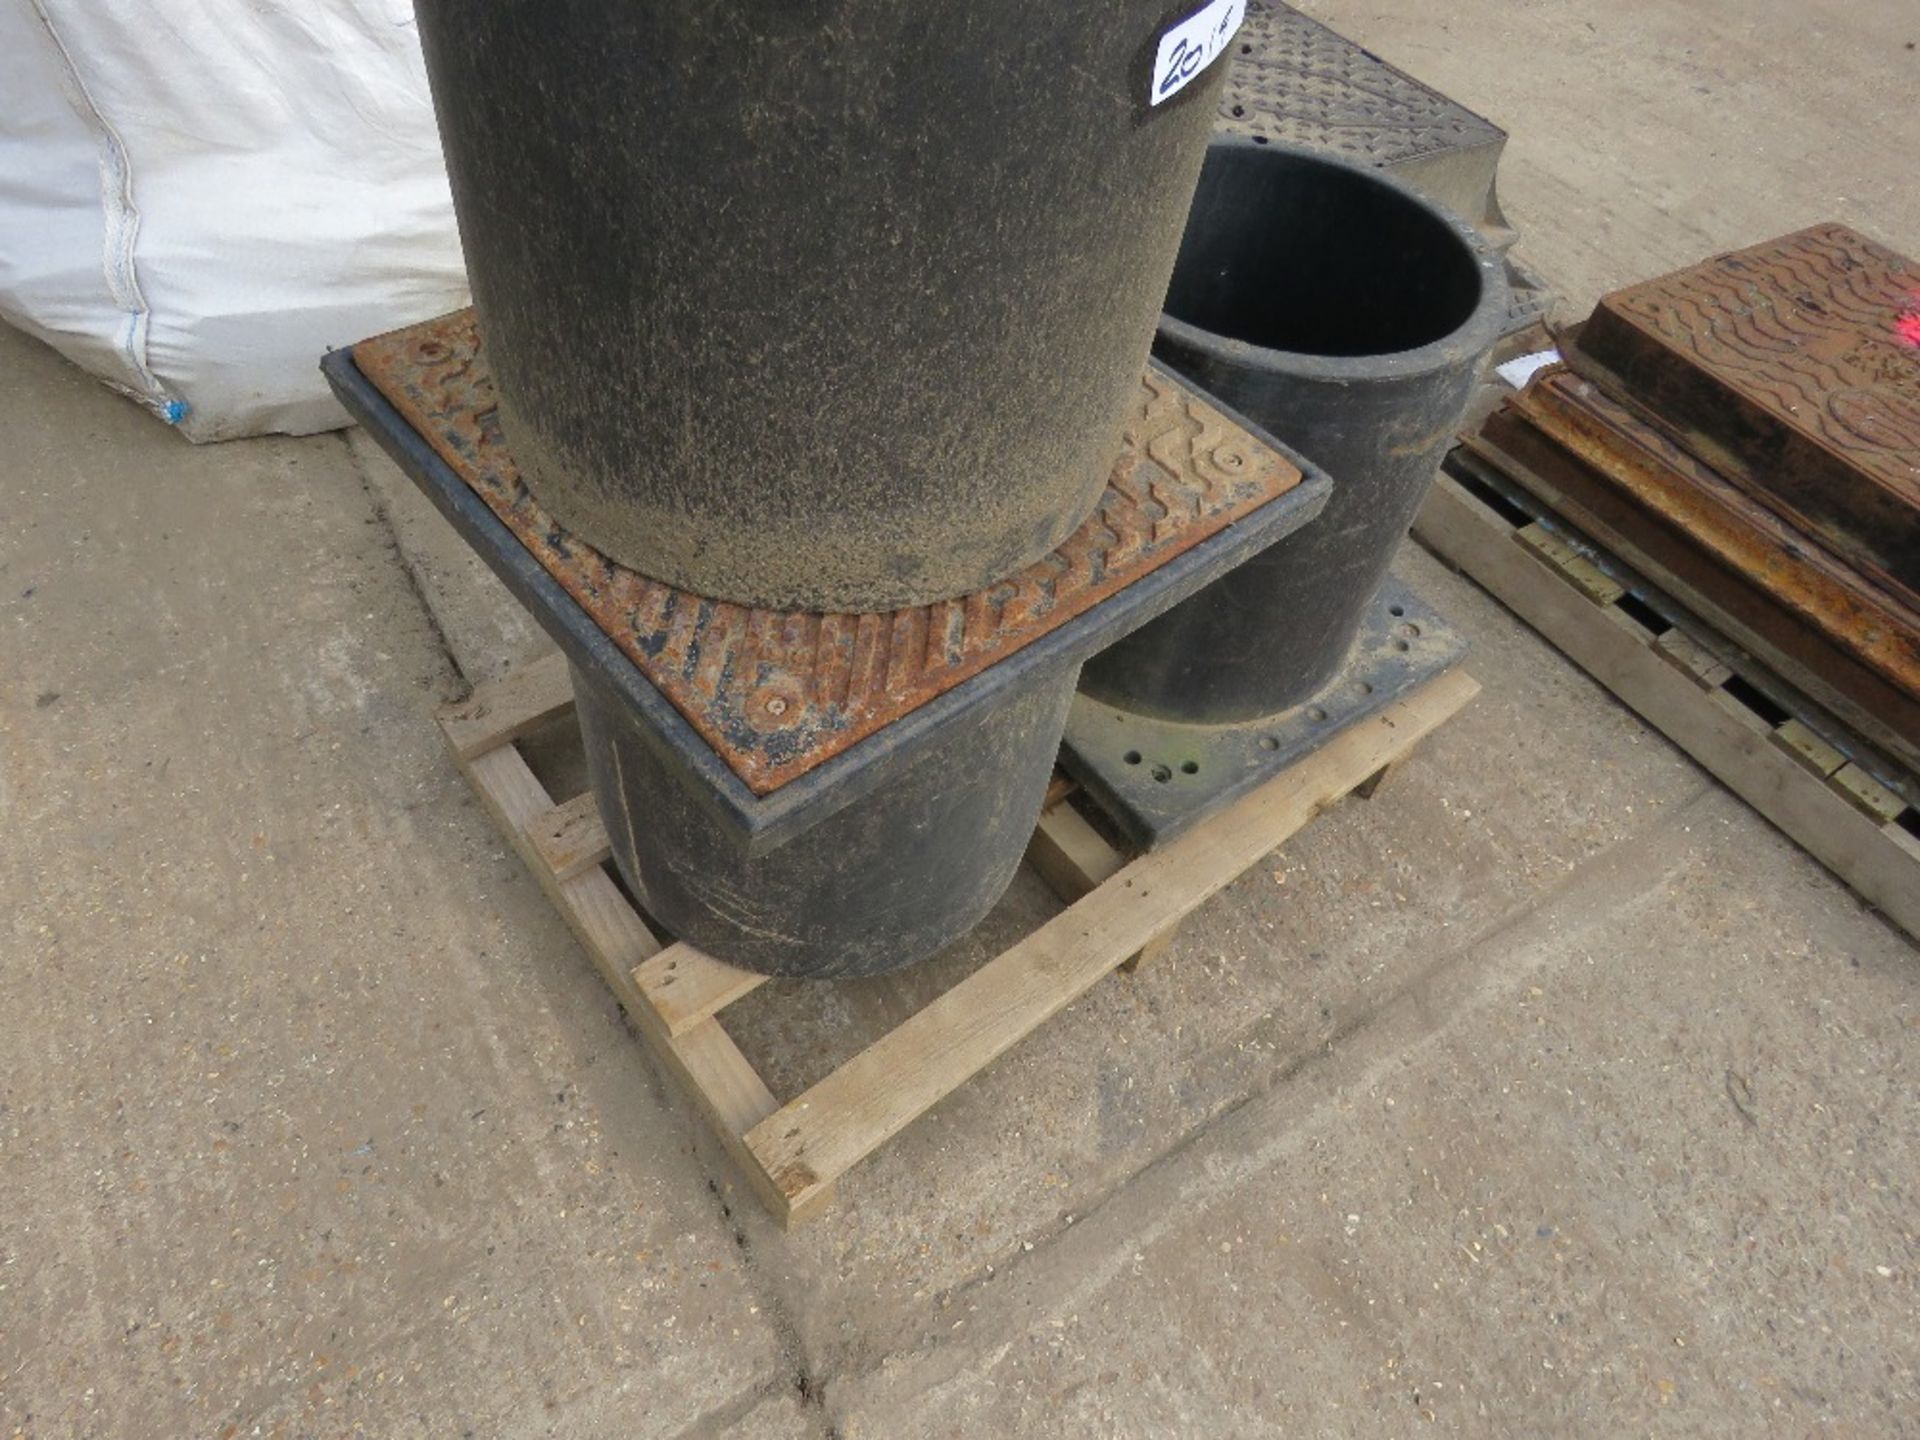 4 X ROUND MANHOLE TUBES WITH TOPS, PLASTIC. LOT LOCATION: EMERALD HOUSE, SWINBORNE ROAD, SS13 1EF, - Image 2 of 3